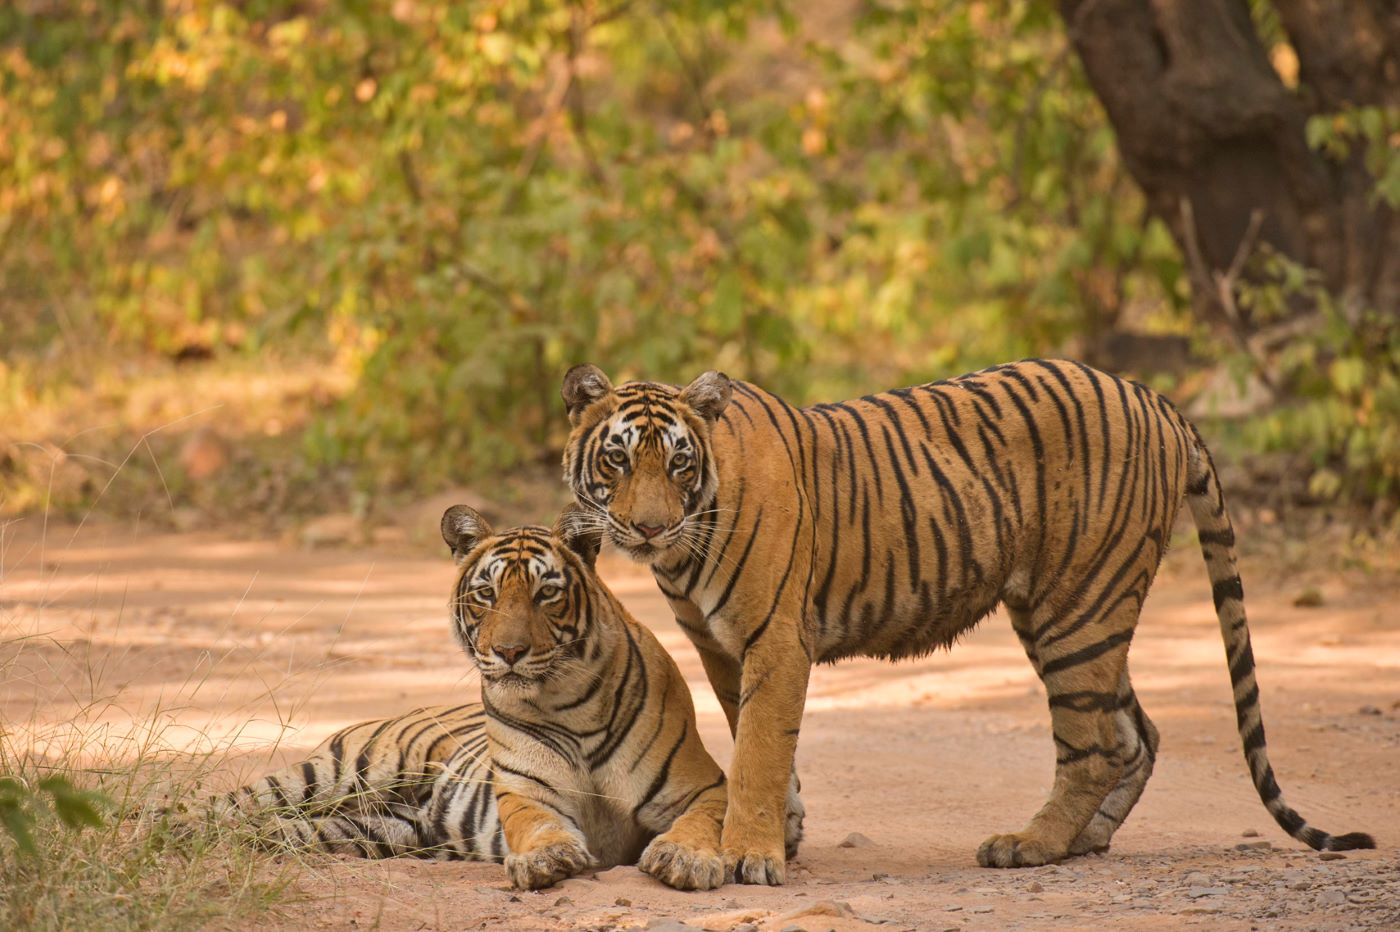 Two tigers looking at the camera